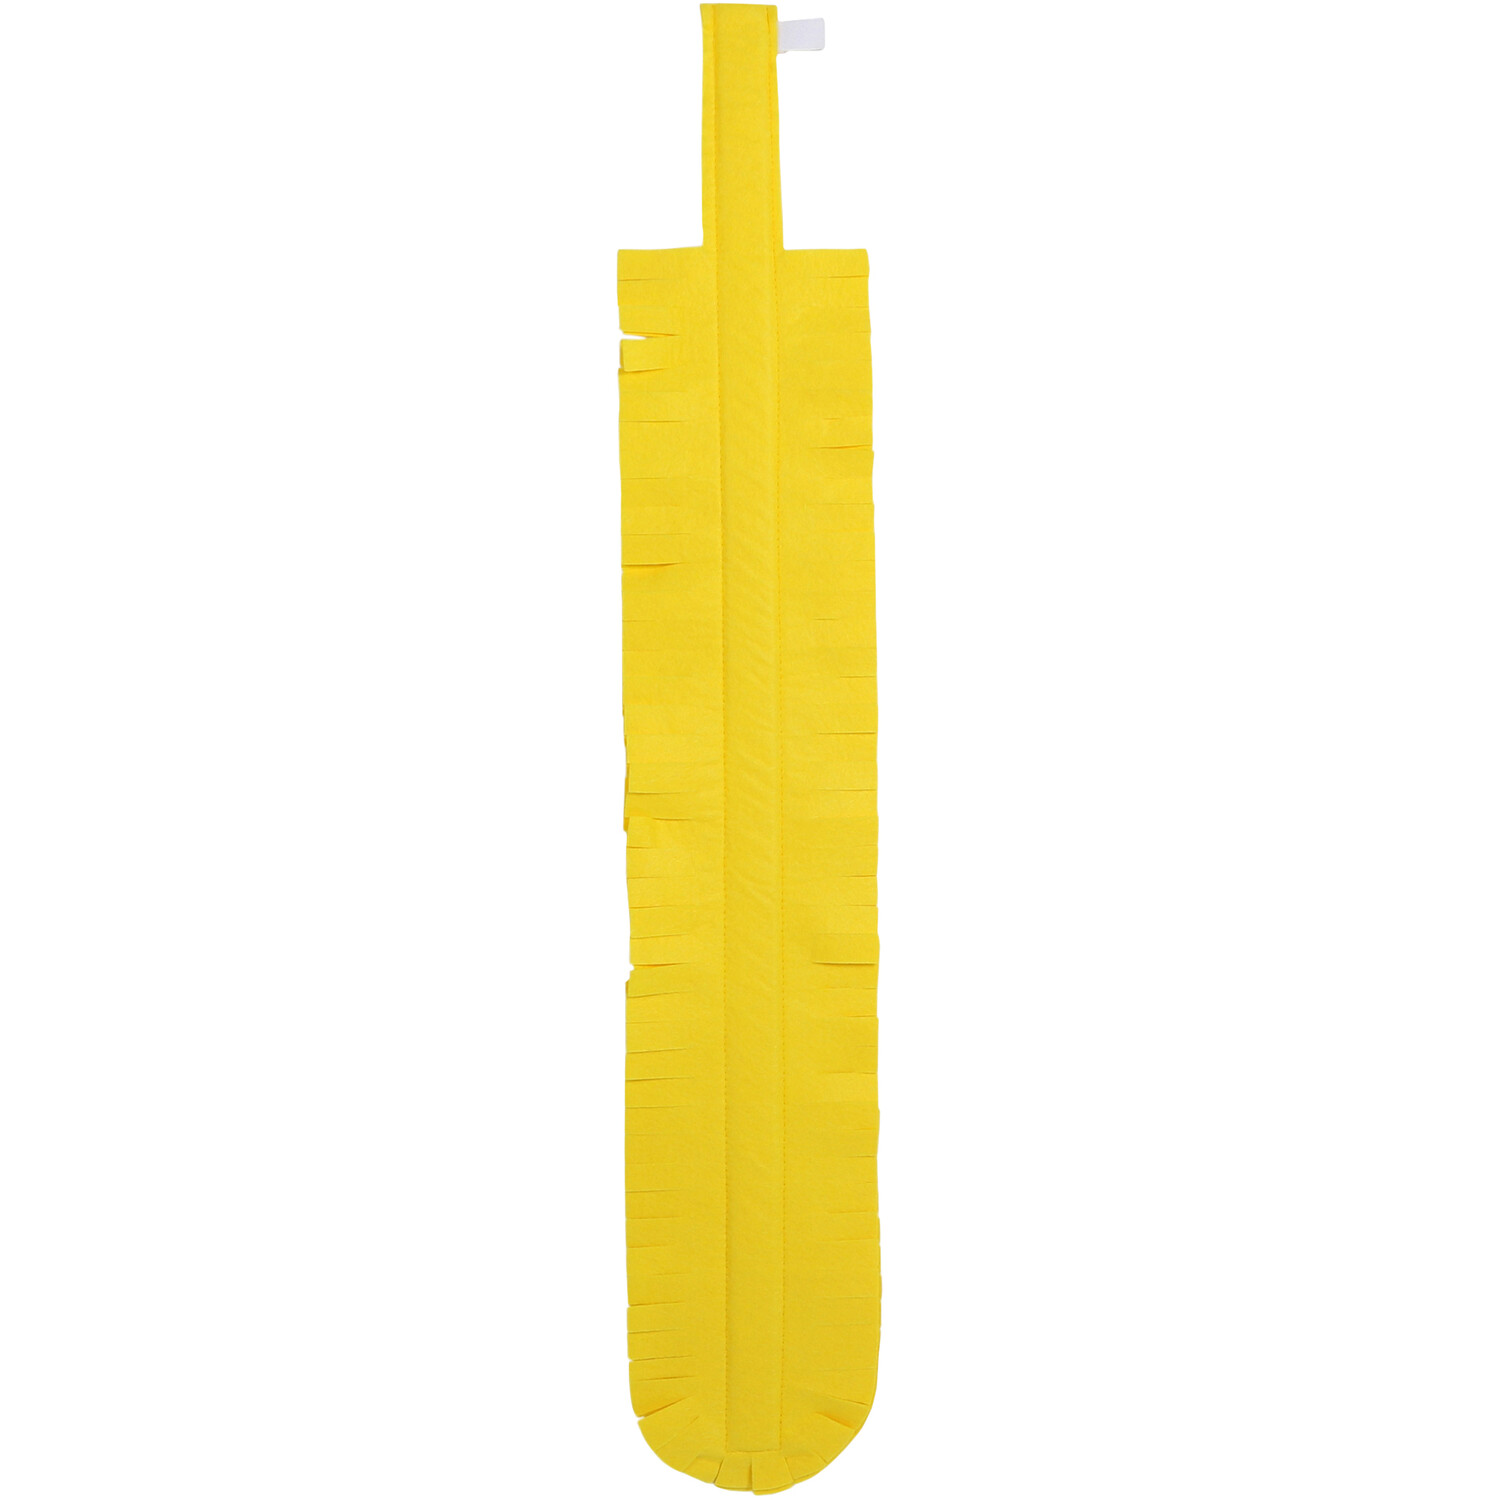 My Home Flexible Cleaning Duster - Yellow Image 3